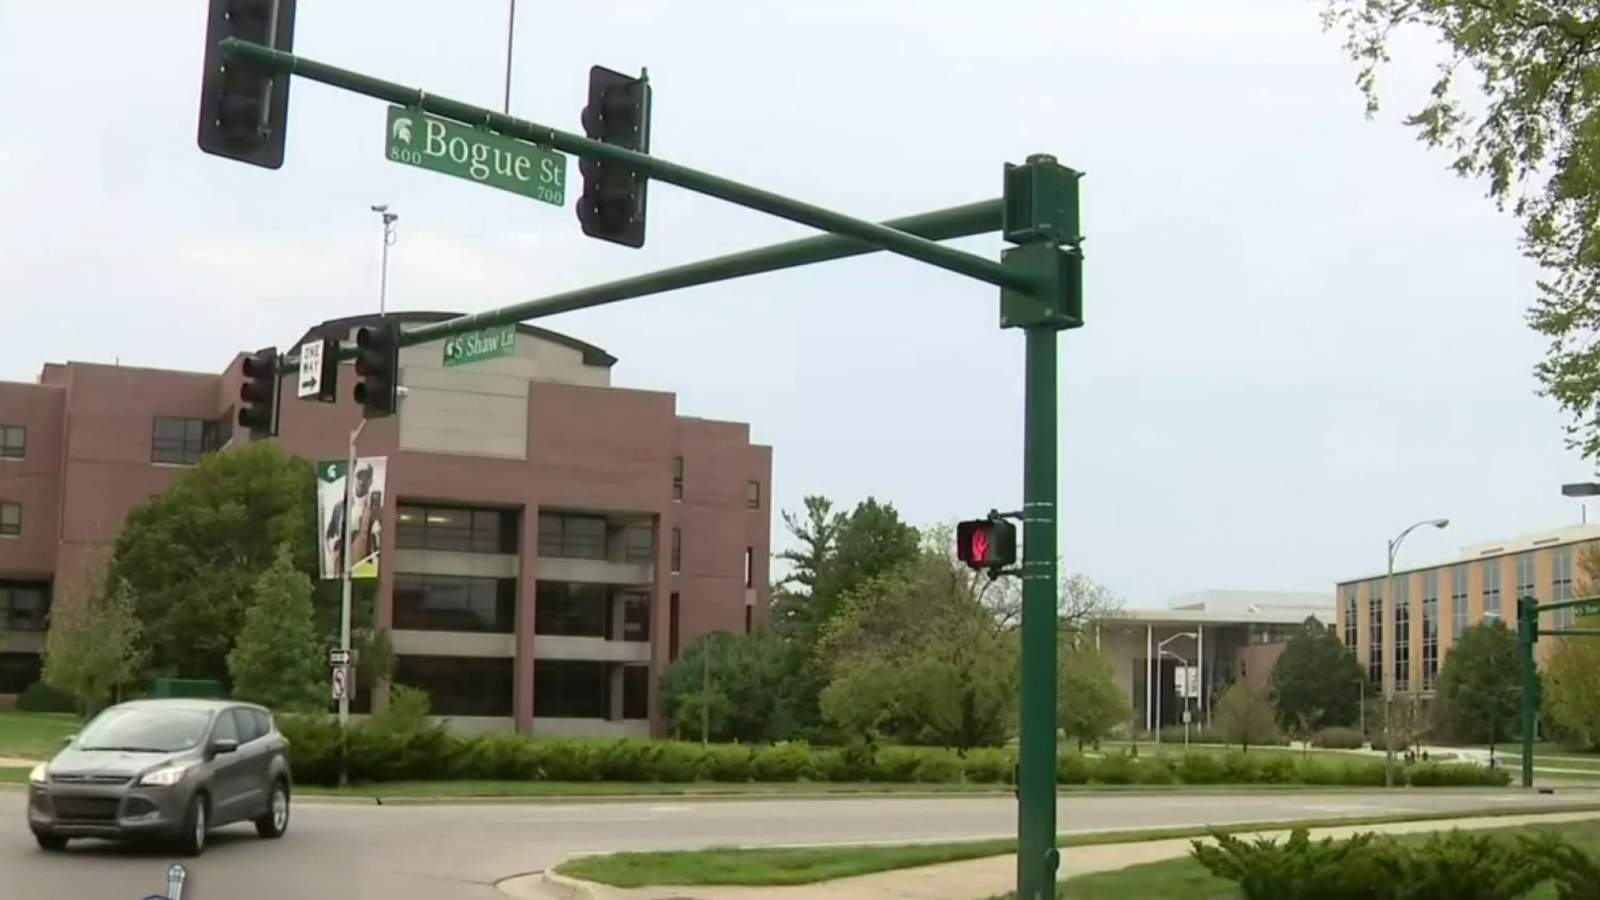 All MSU students asked to self-quarantine after school confirms 300+ COVID-19 cases